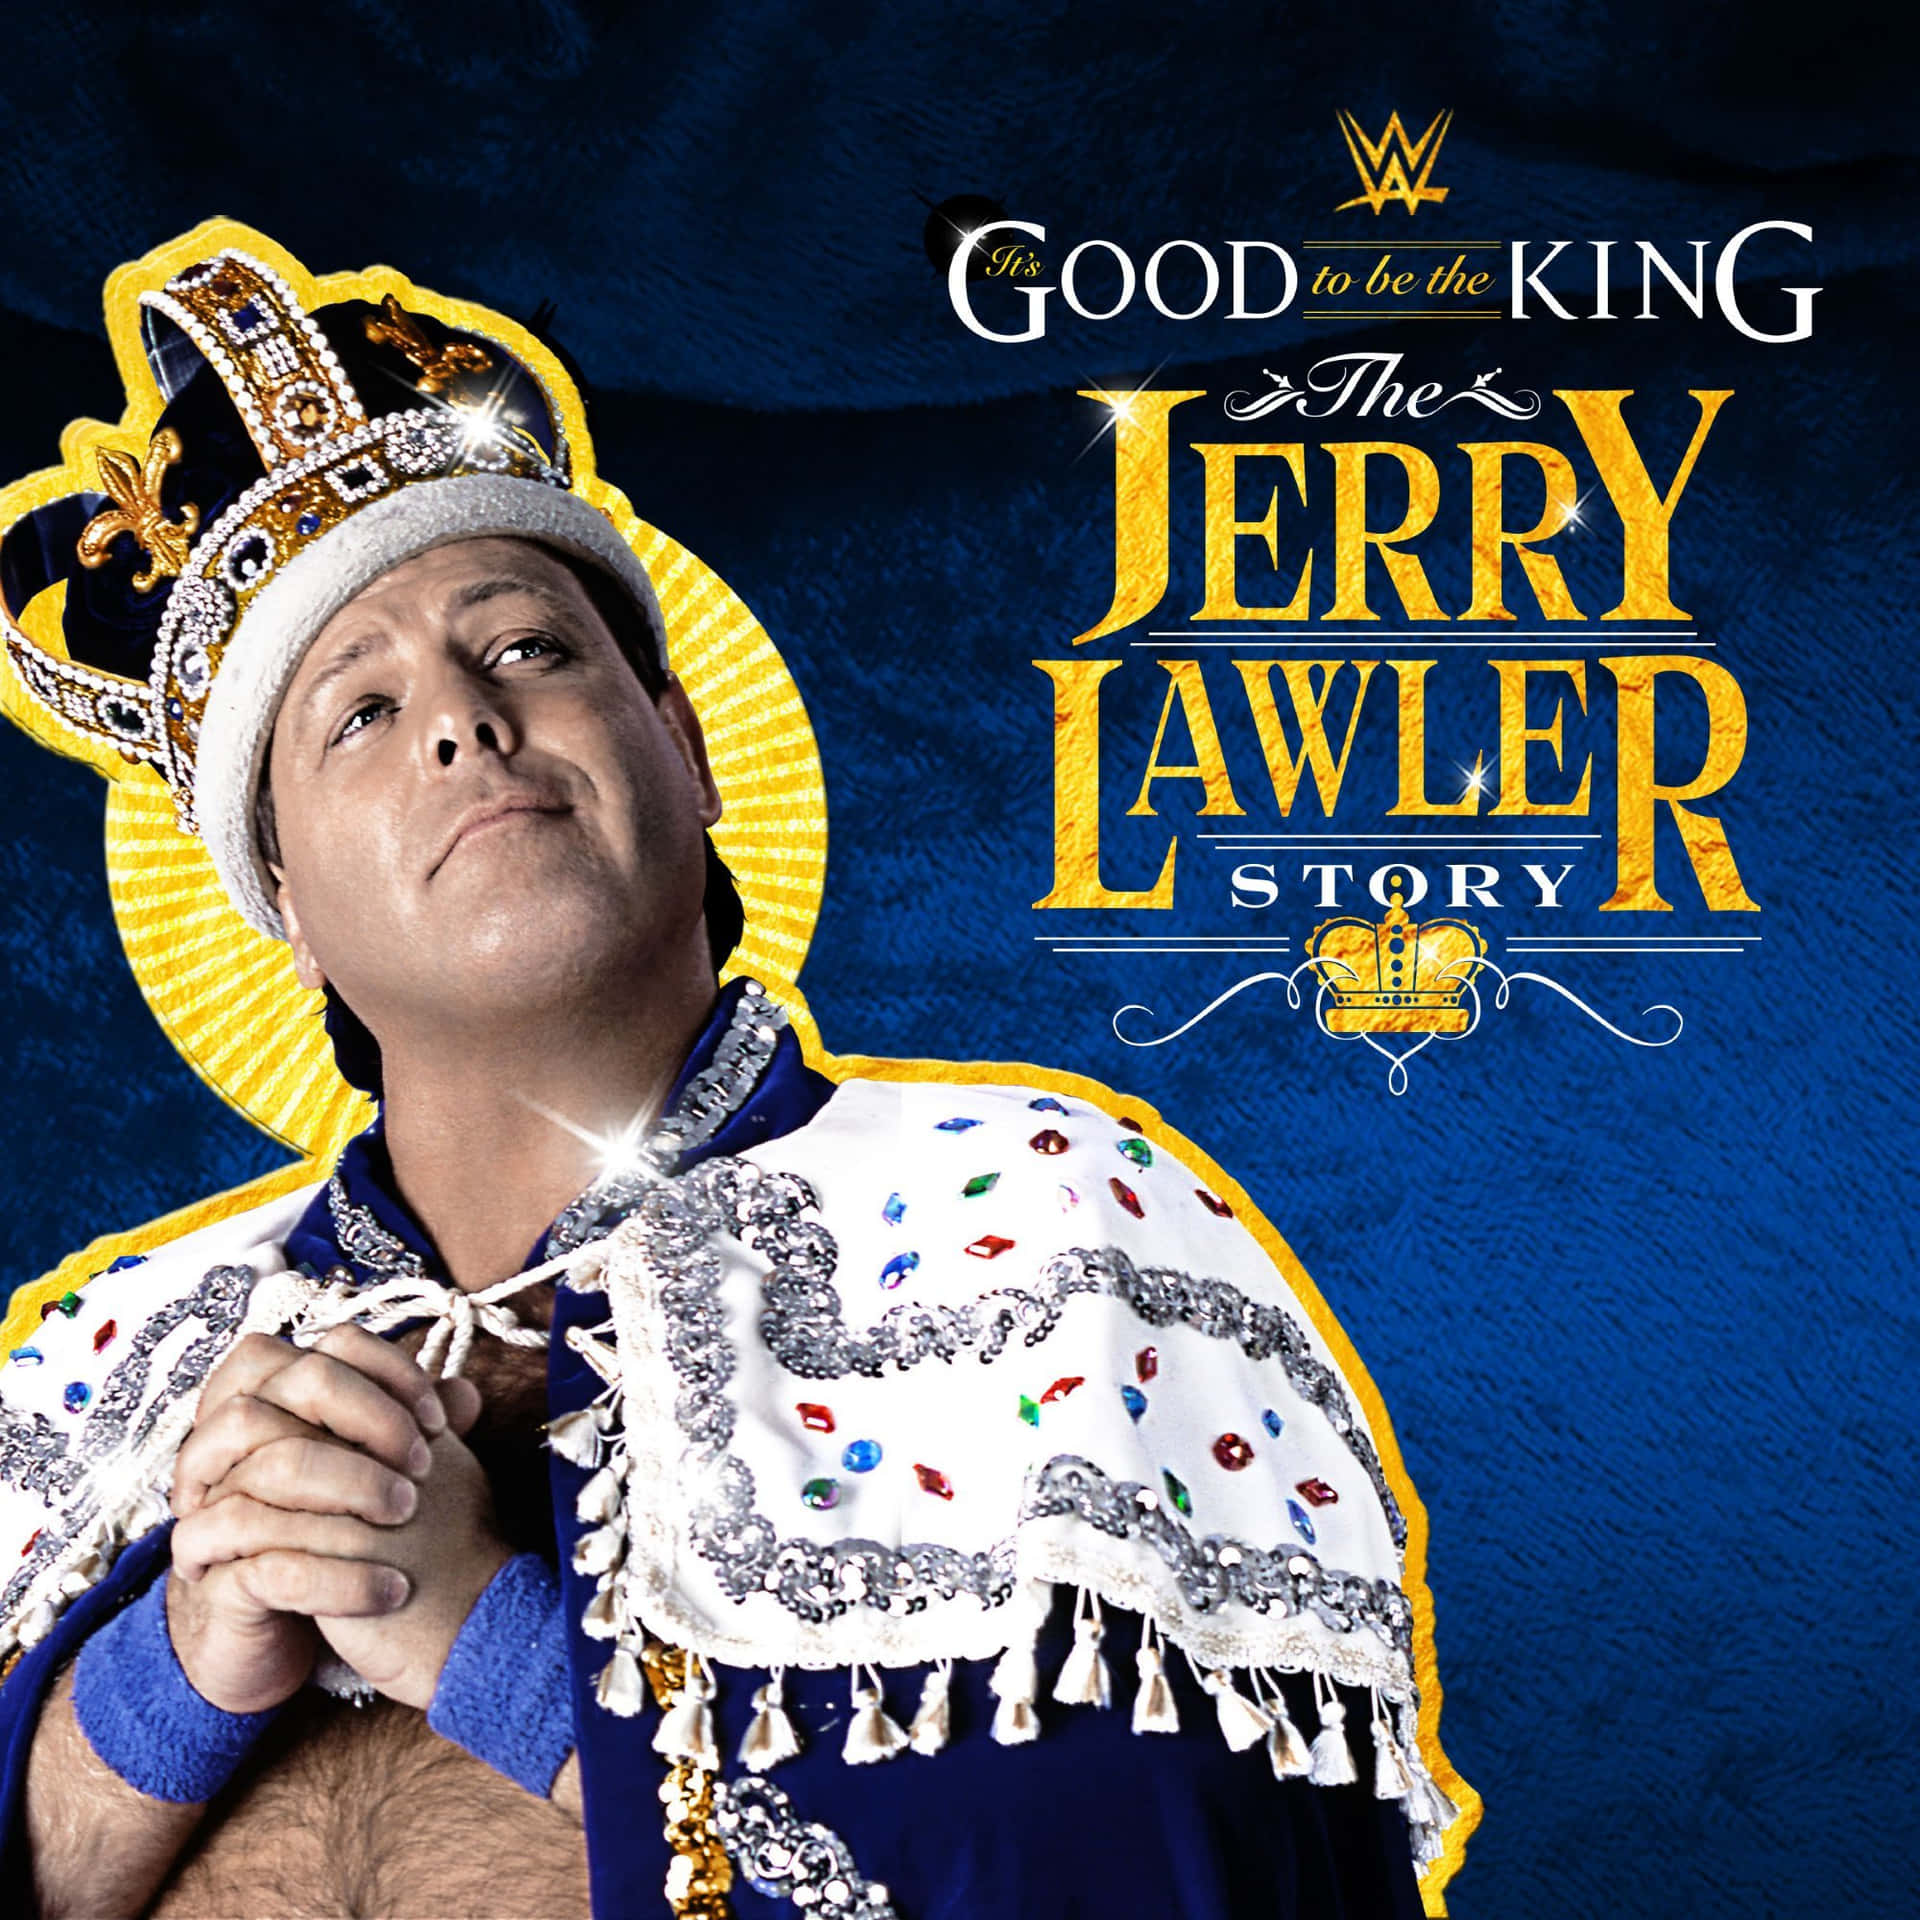 Jerry Lawler Life Story Wallpaper